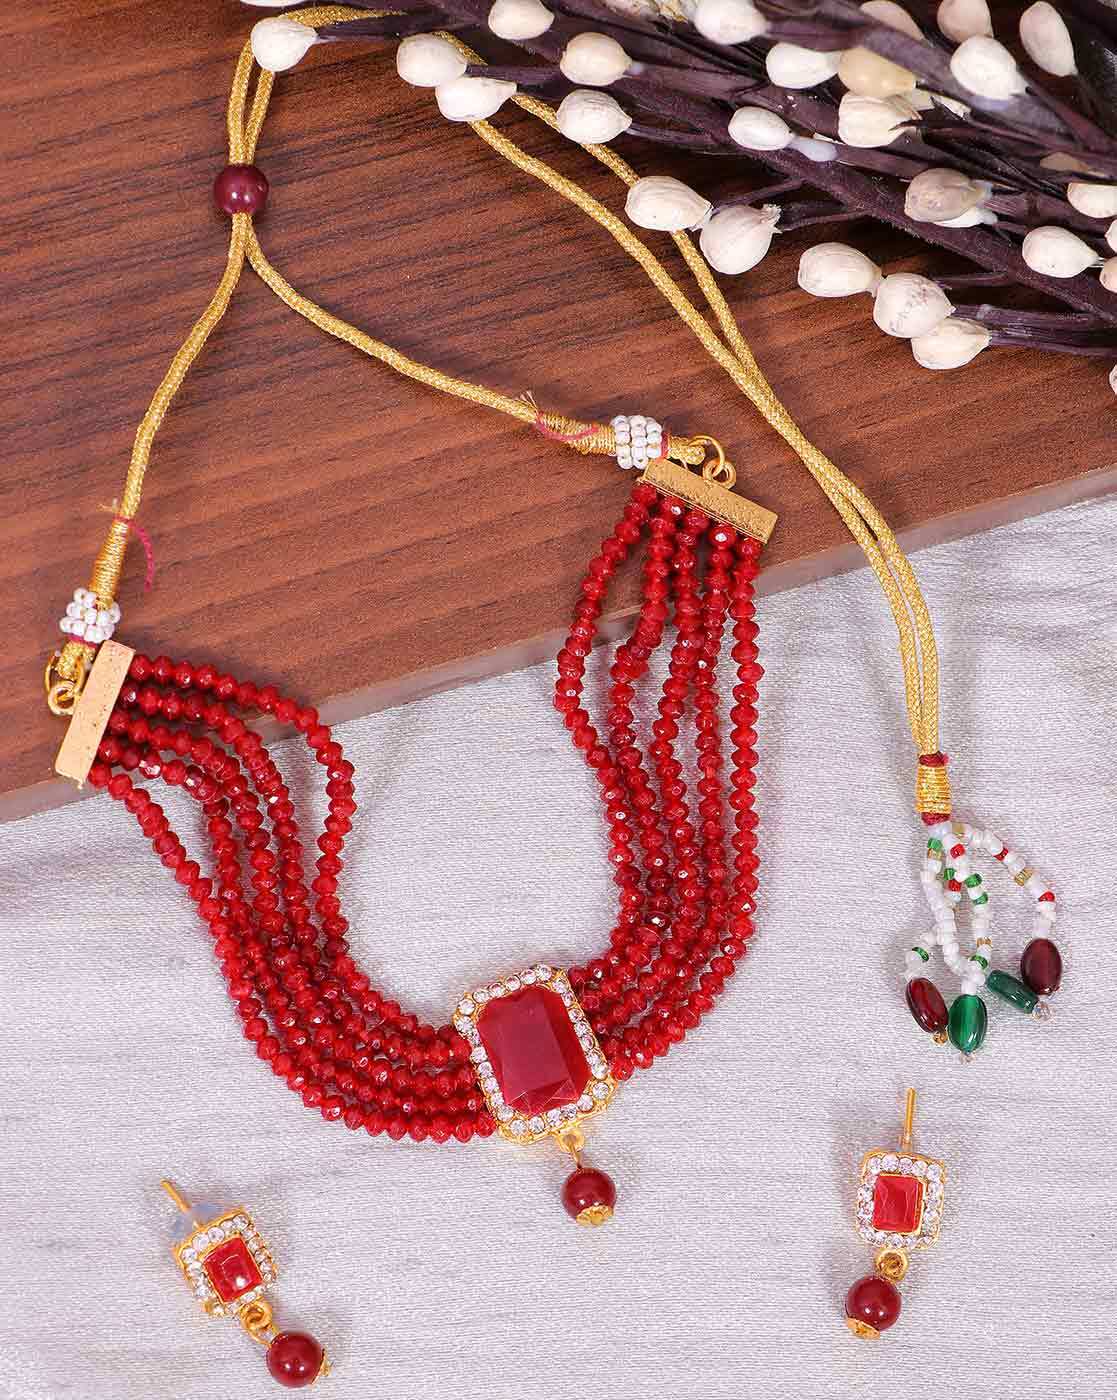 22K Gold 'Mango' Necklace with Red Stones - 235-GN3045 in 26.900 Grams